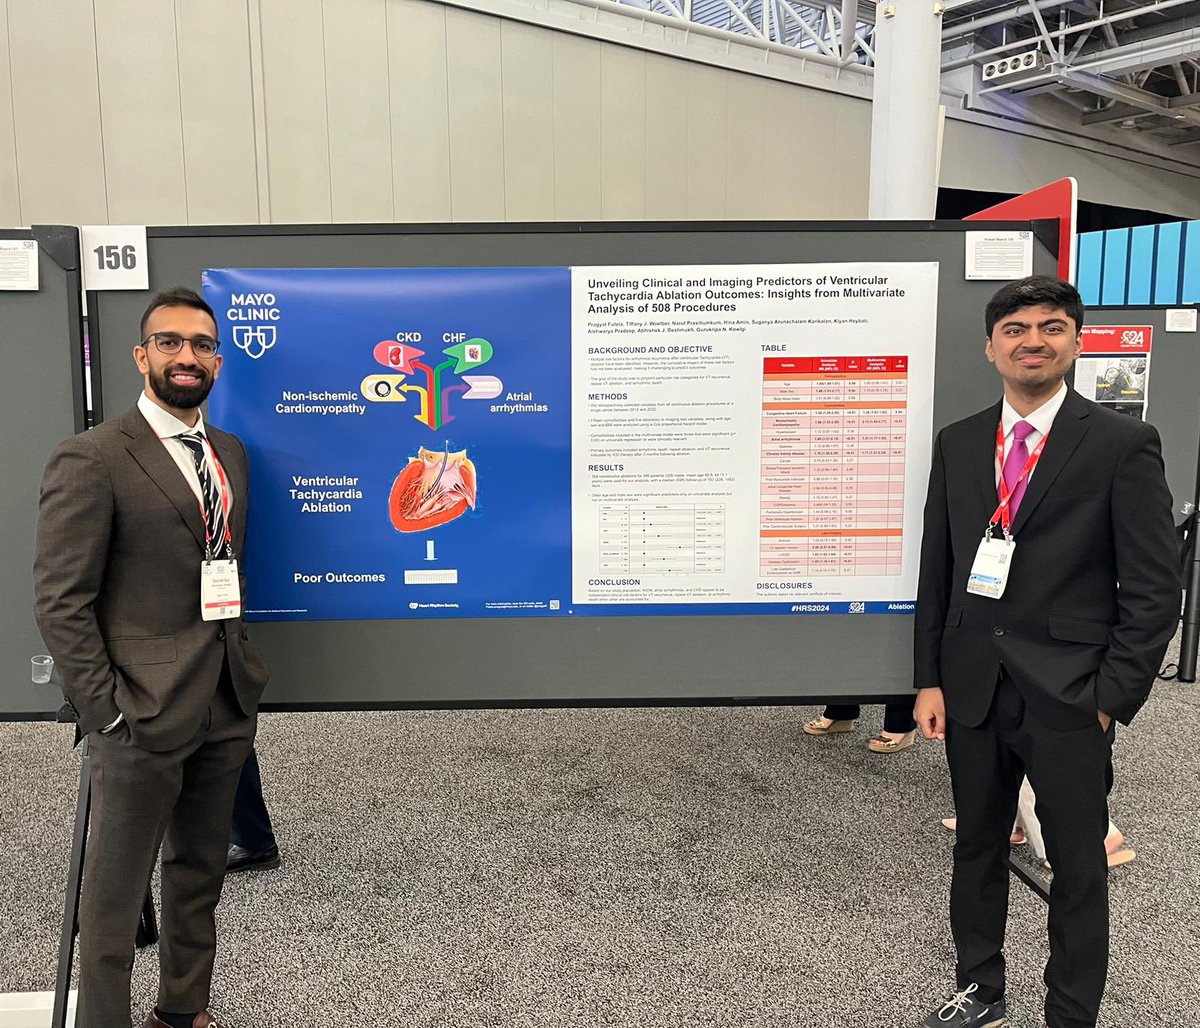 Proud of our research team at @MayoClinicCV who presented multiple abstracts from our VT ablation database with detailed intraprocedural characteristics and our translational lab data on the effect of PFA on GP ablation. Stellar work 🙌🏽 @HRSonline @jczerpa @Pachon_CNA